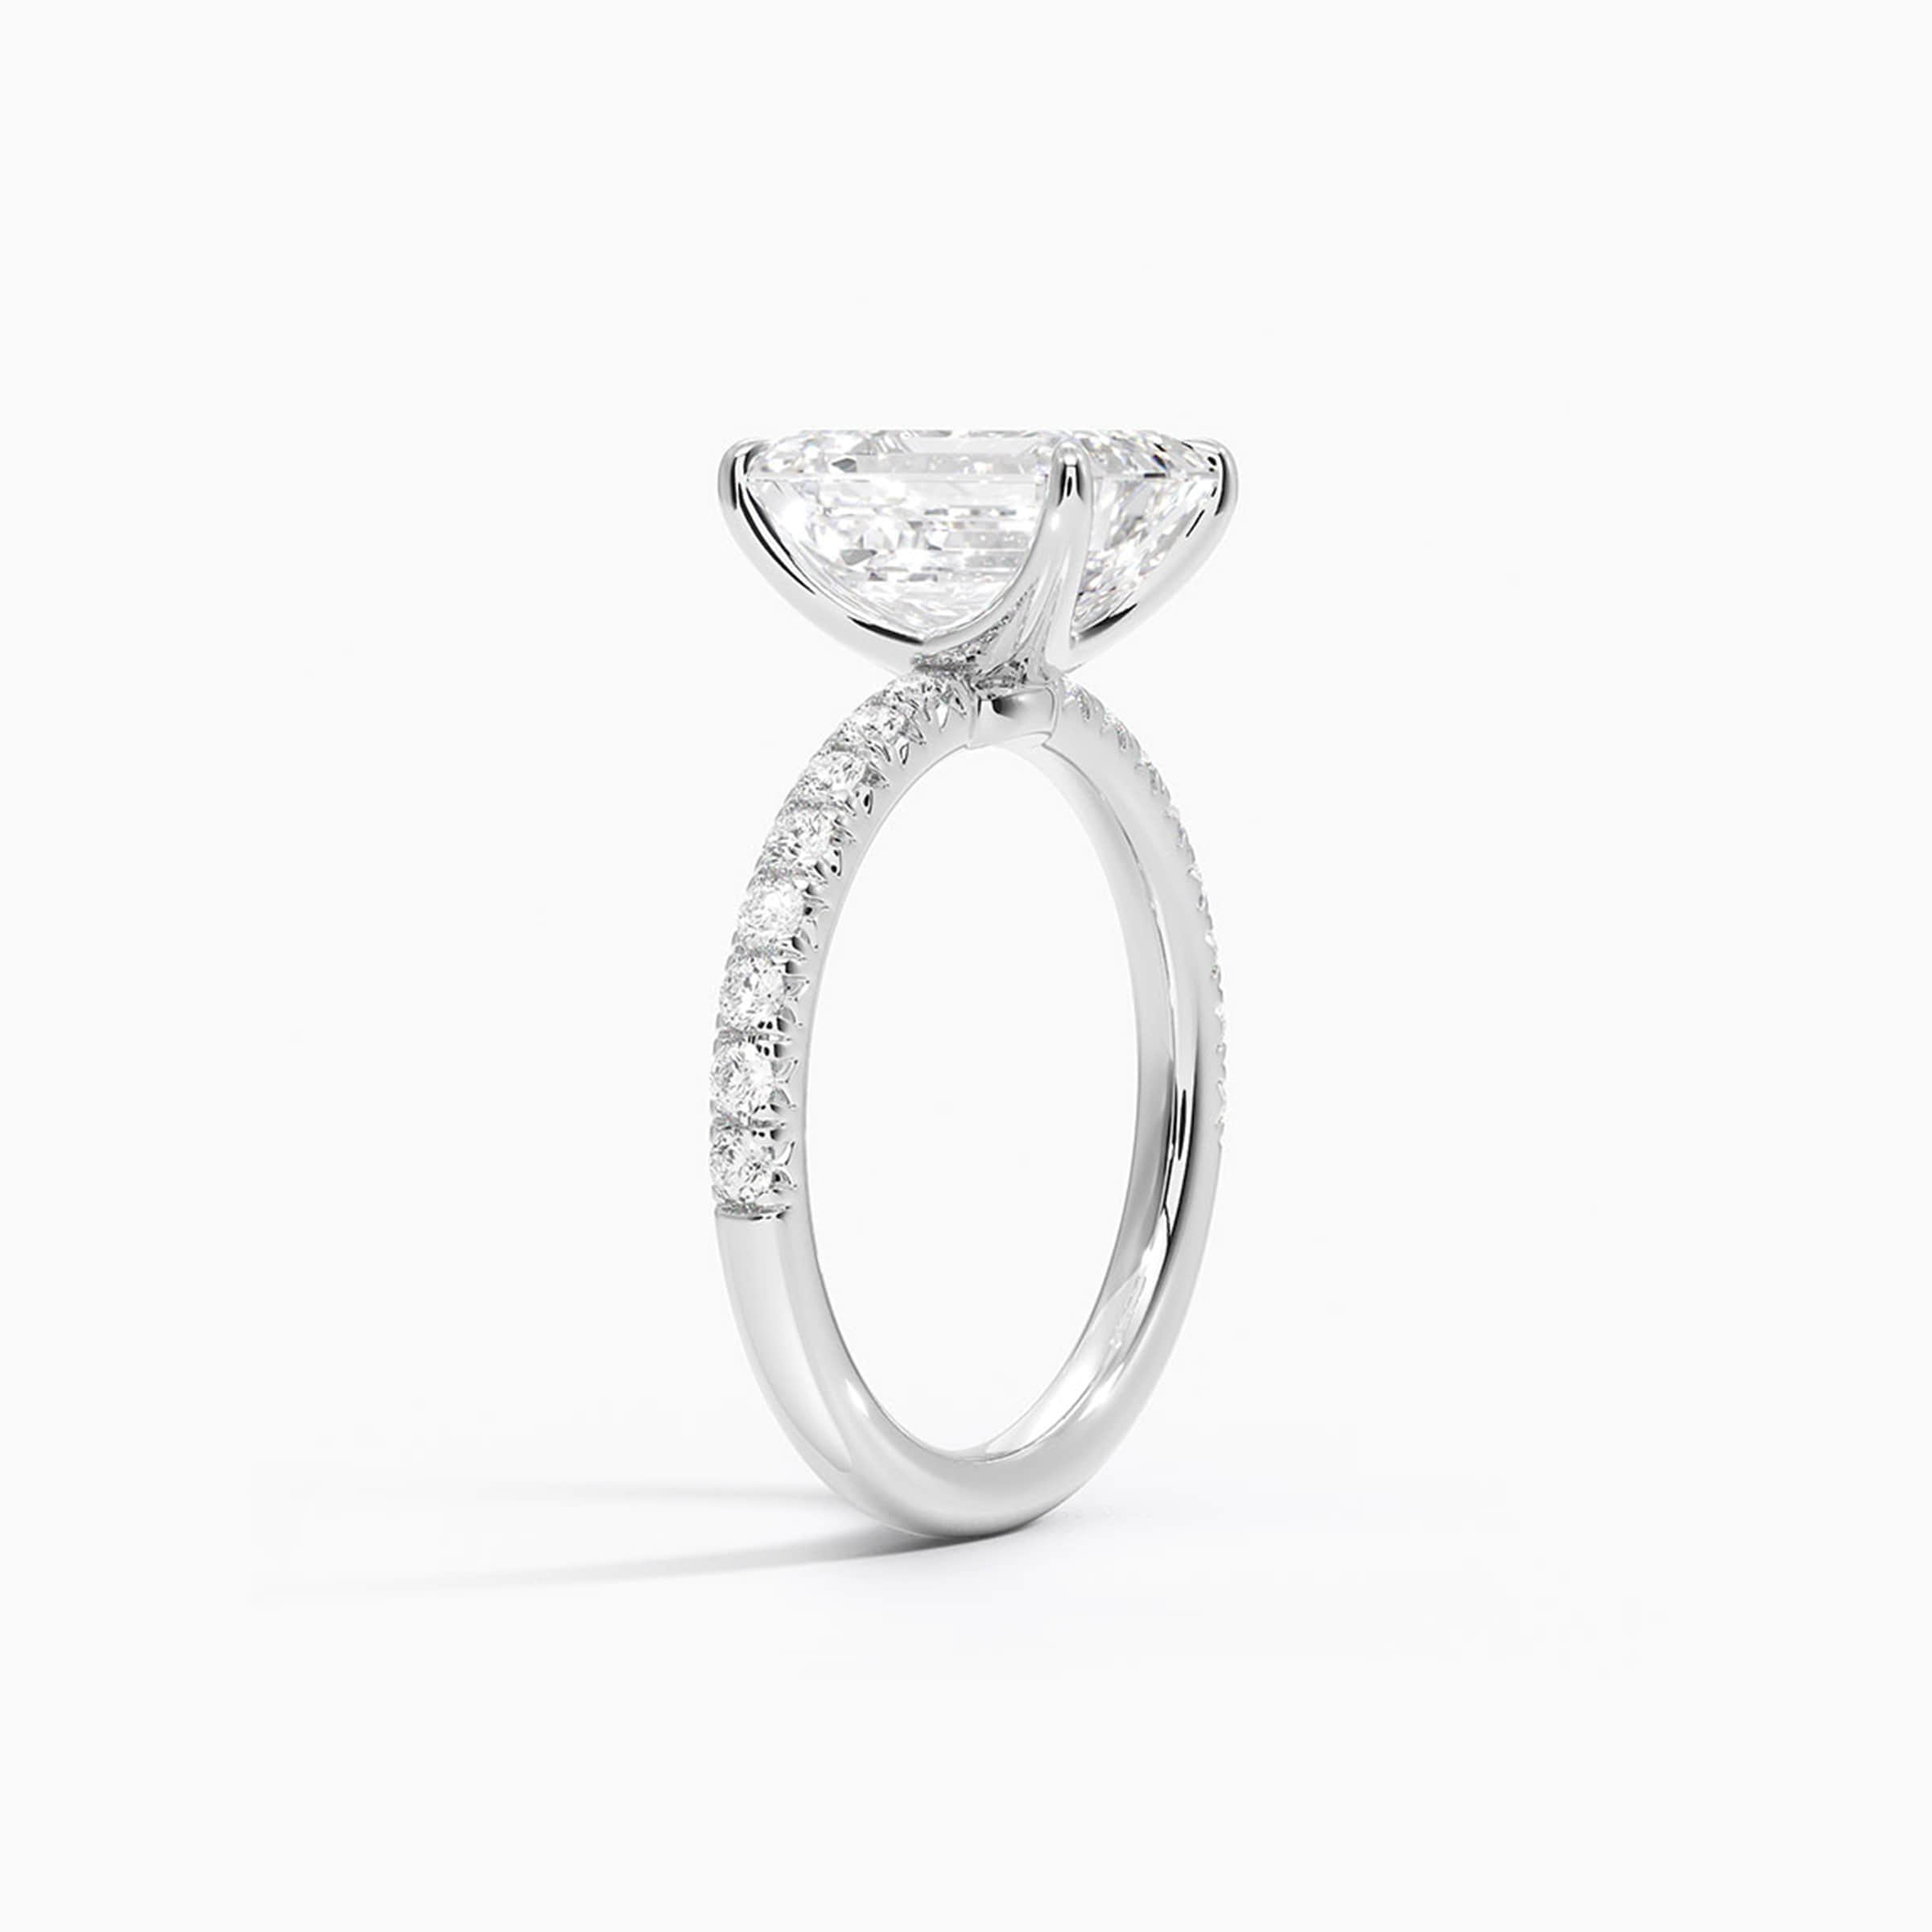 Darry Ring emerald cut engagement ring white gold